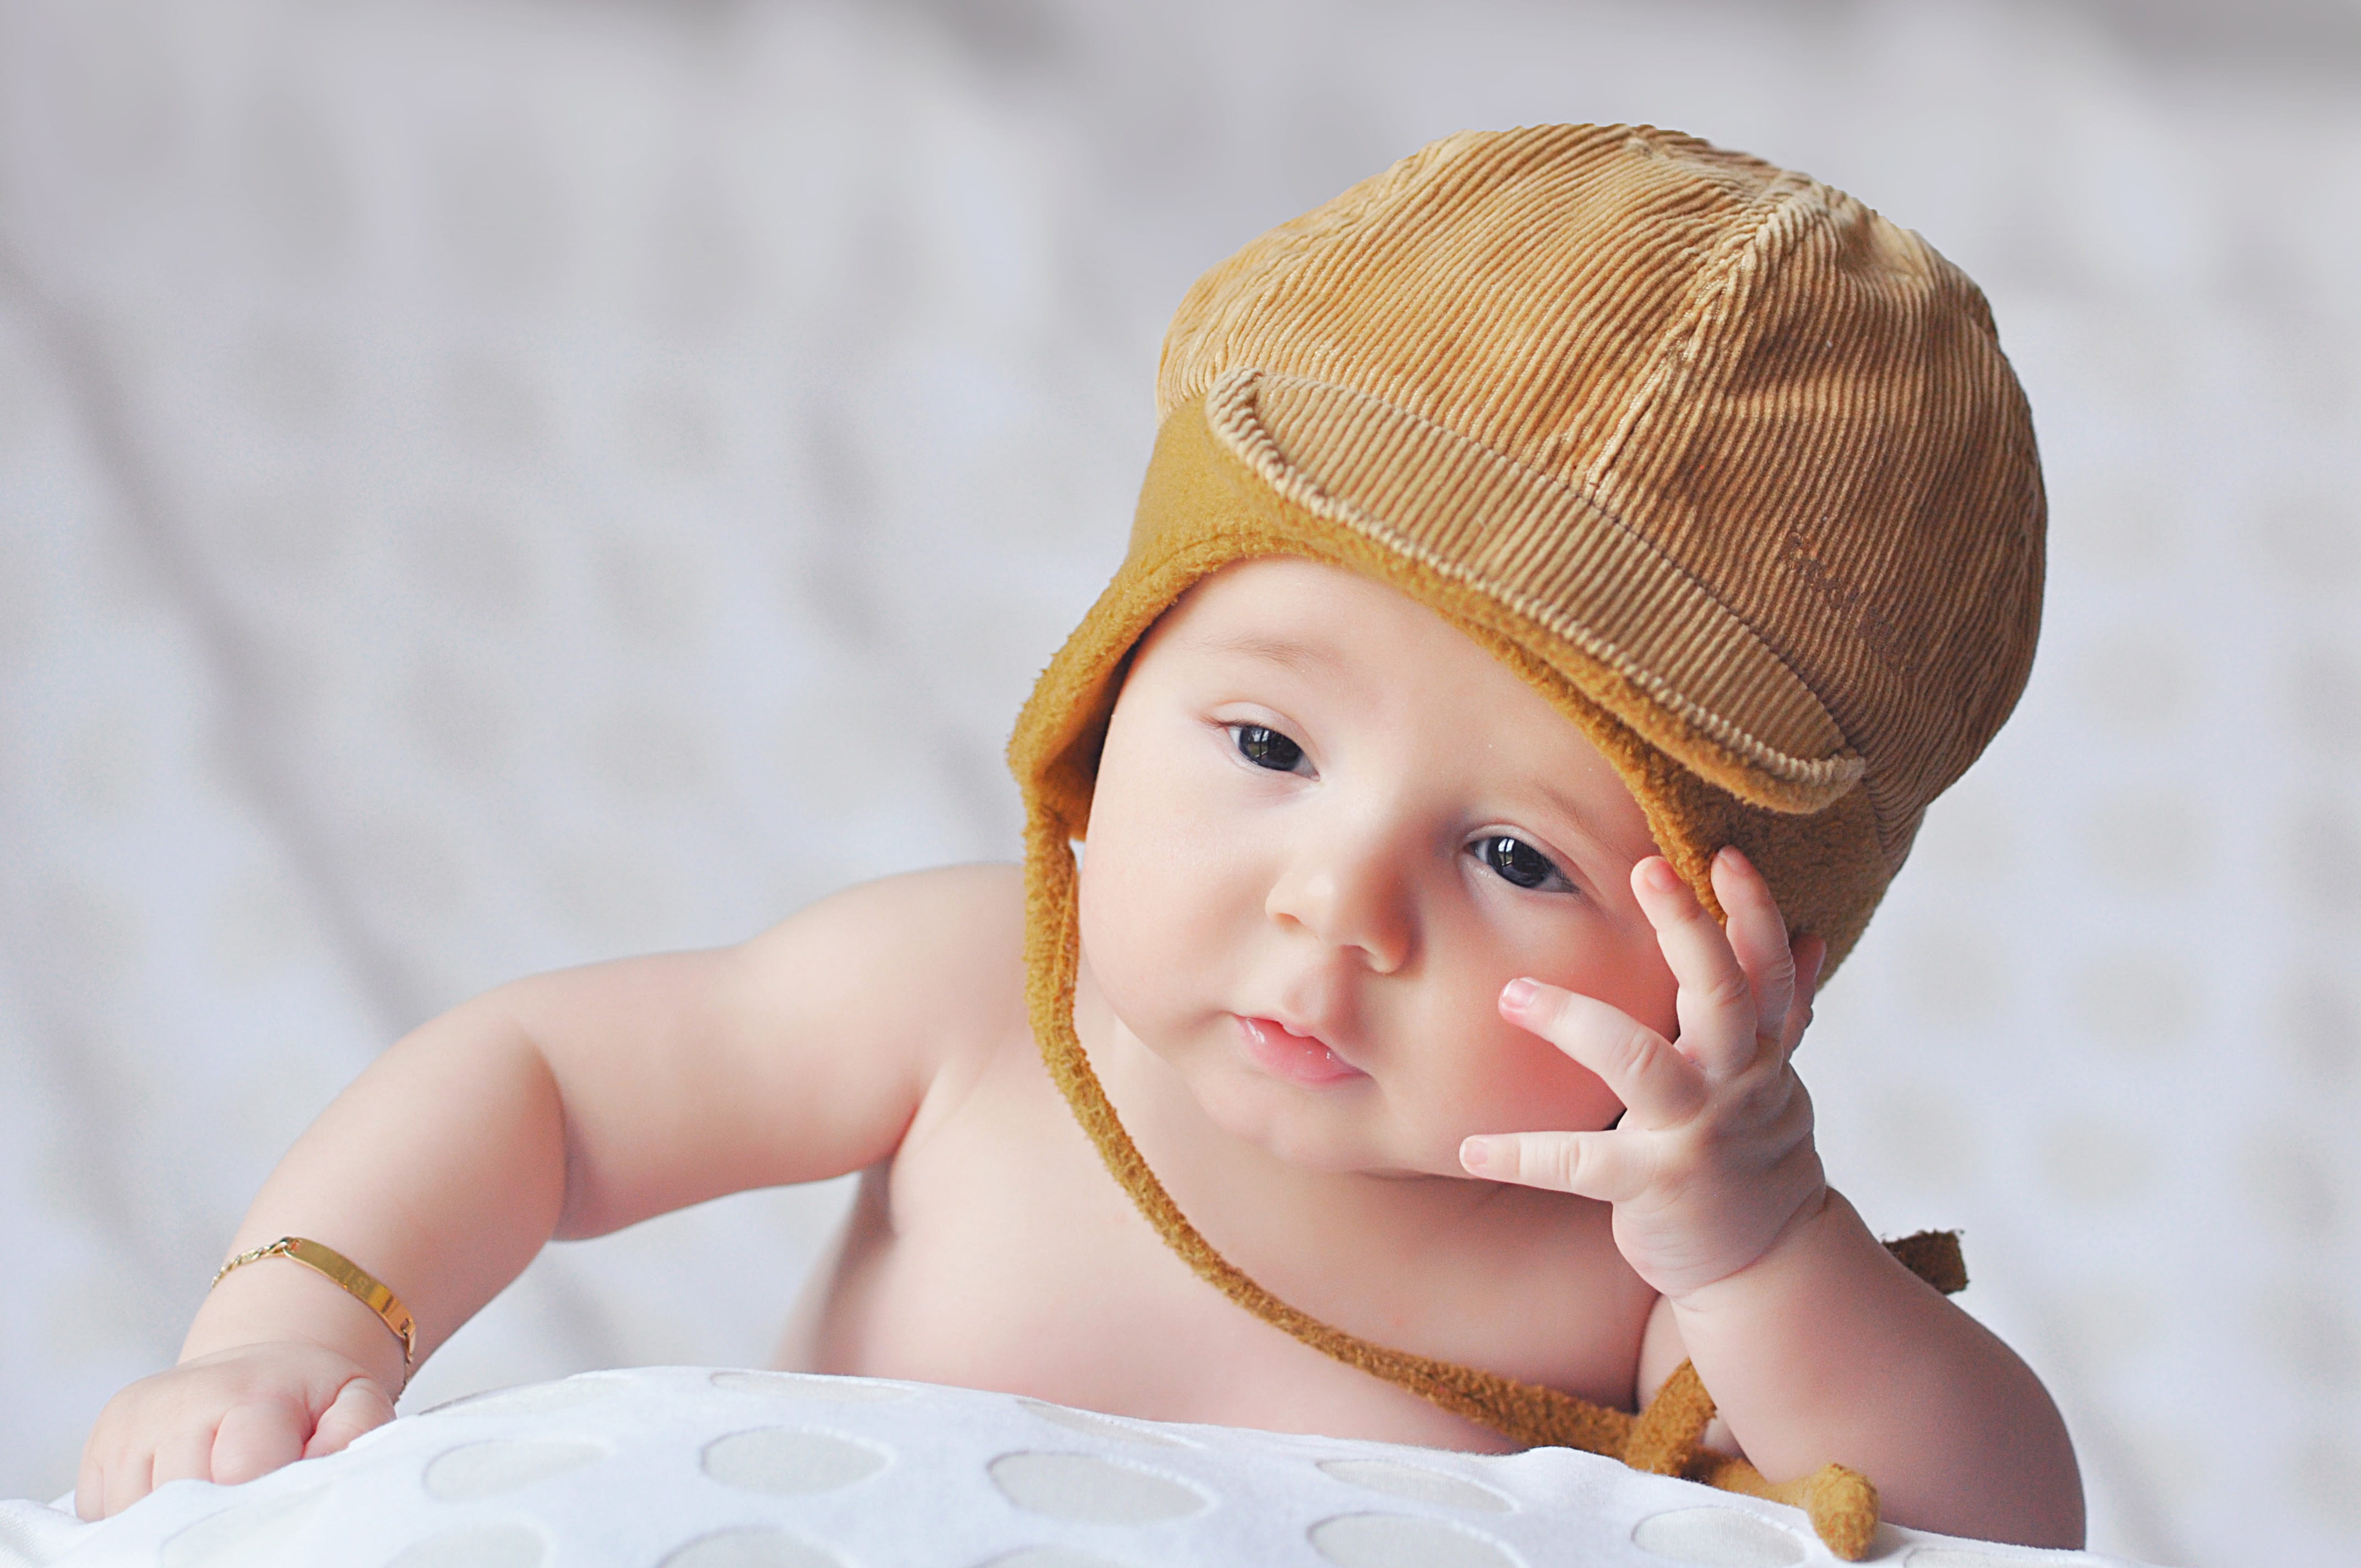 Young baby wearing hat, people, boy, child, children, family